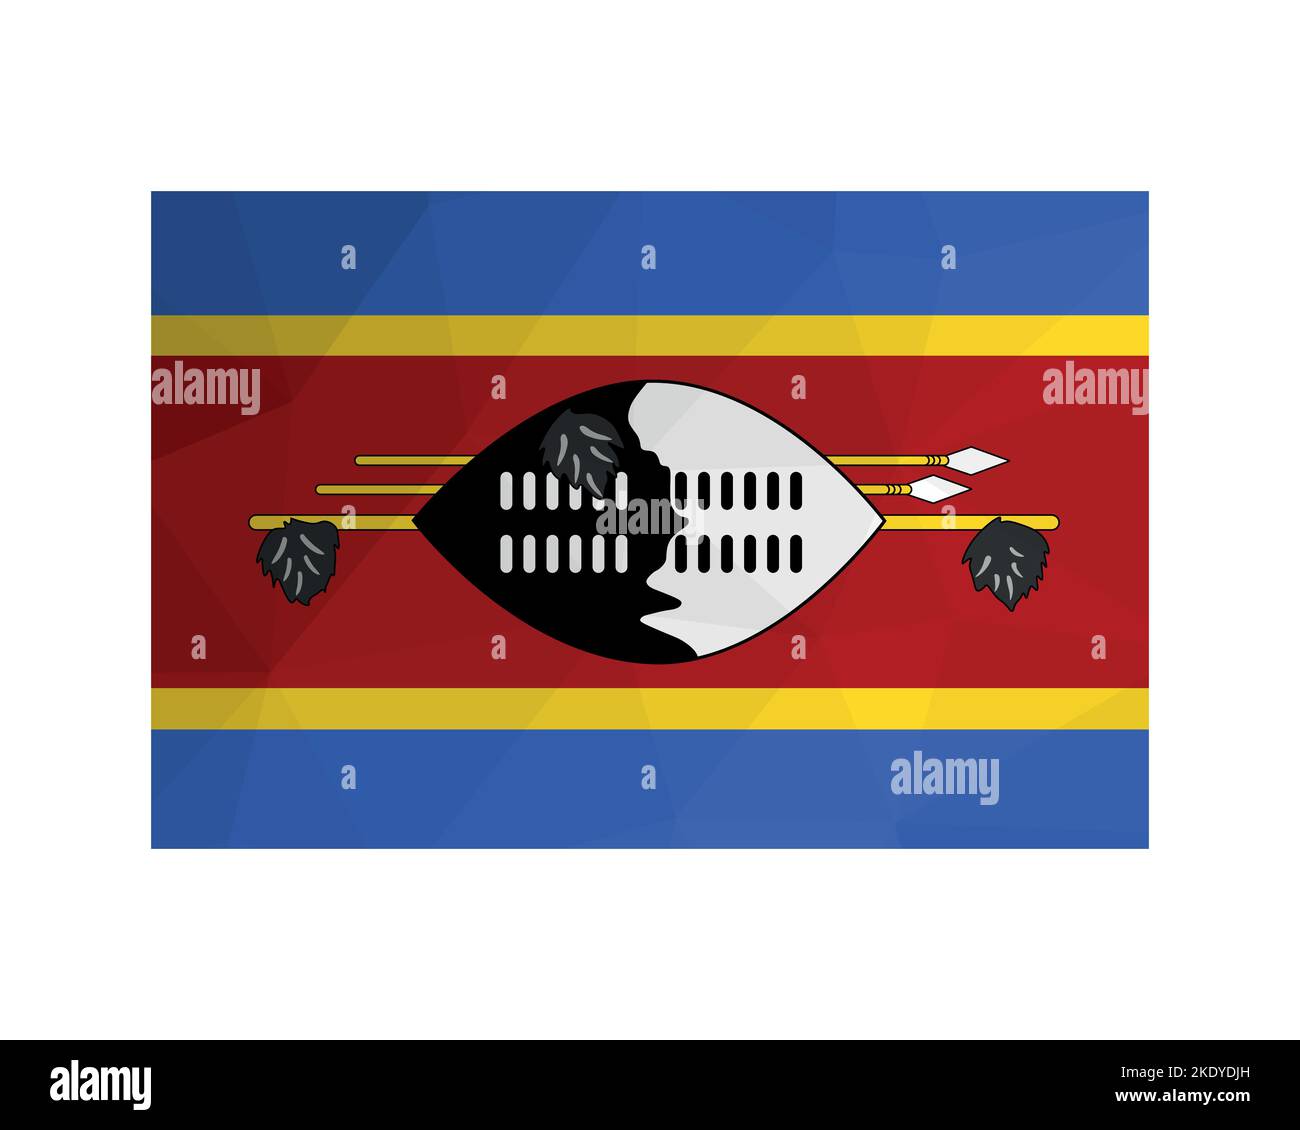 Vector illustration. Official ensign of Eswatini. National Swaziland flag with blue, red, yellow stripes. Creative design in low poly style with trian Stock Vector